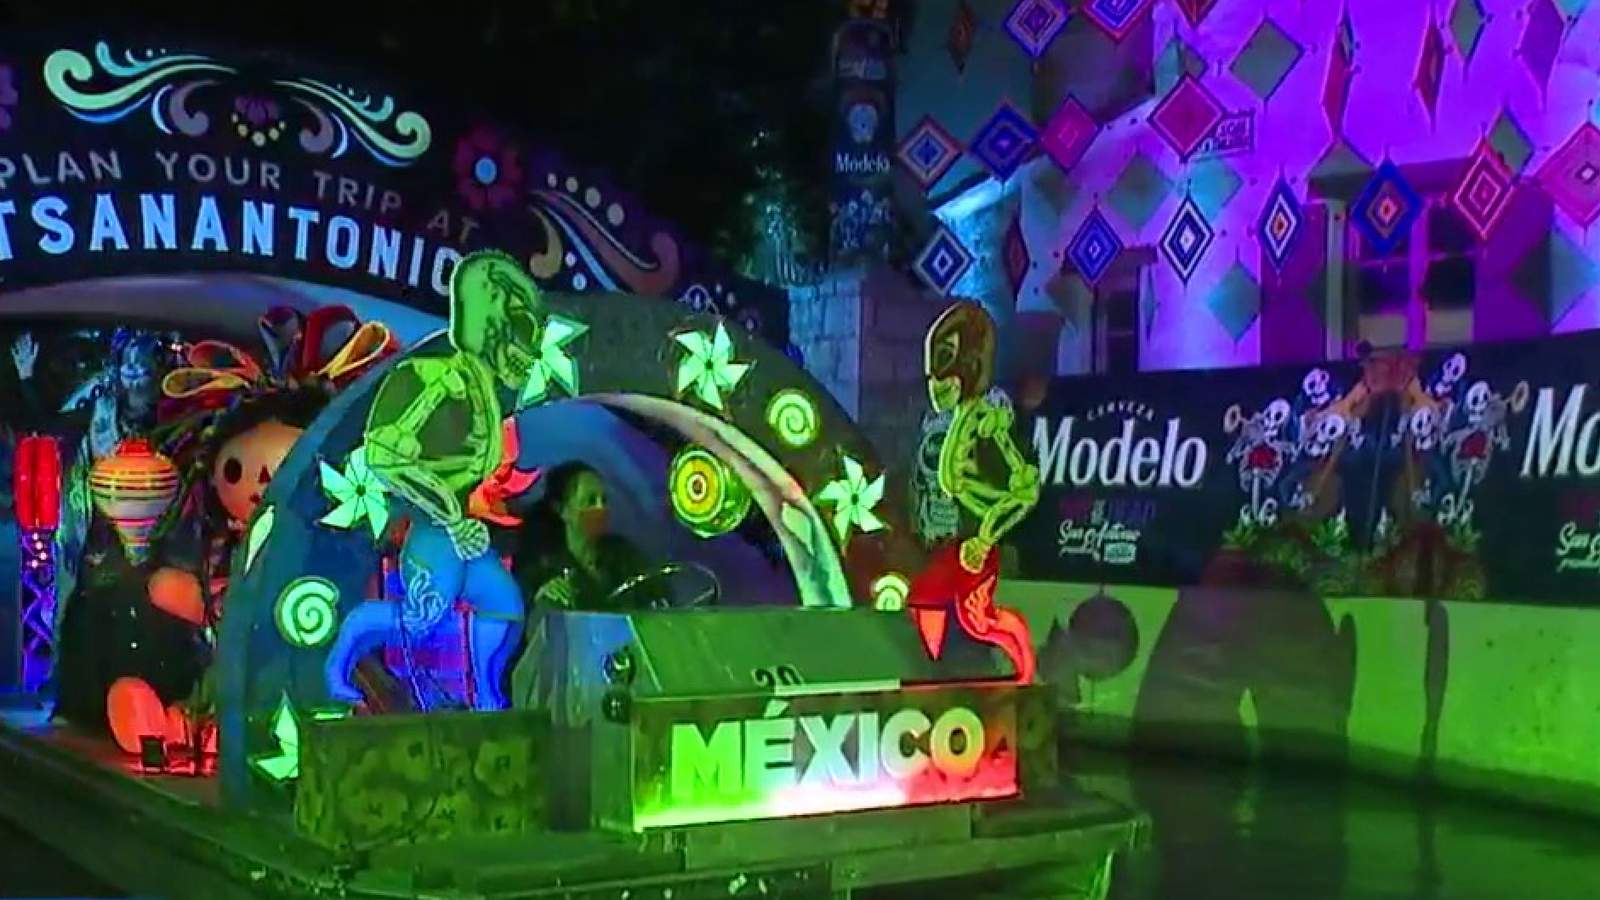 GMSA@9 Debrief: Preview of KSAT’s virtual Day of the Dead River Walk parade Friday night